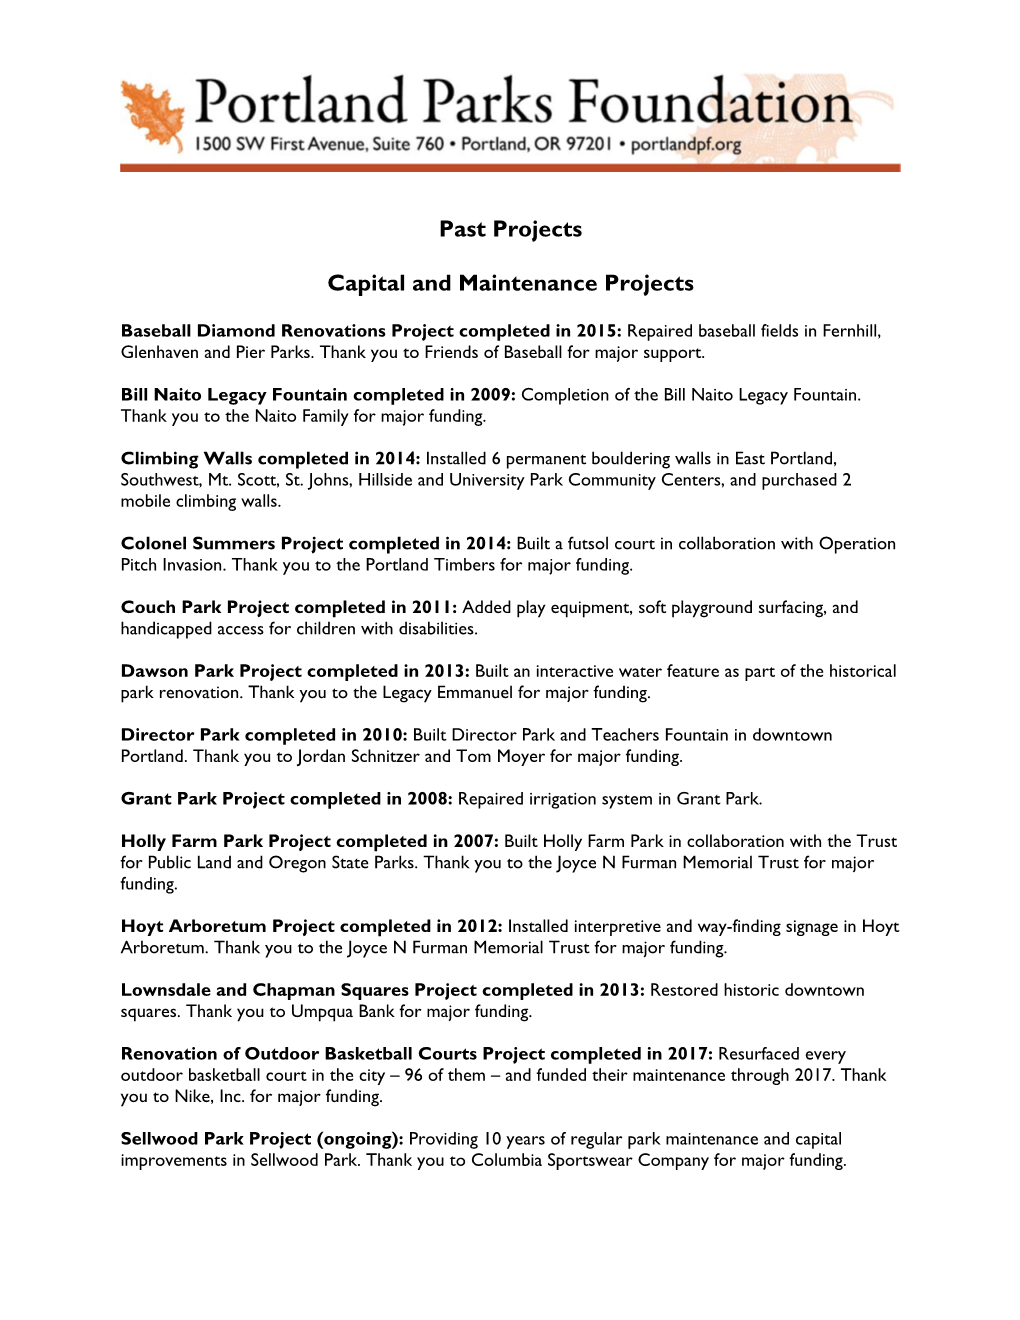 Past Projects Capital and Maintenance Projects